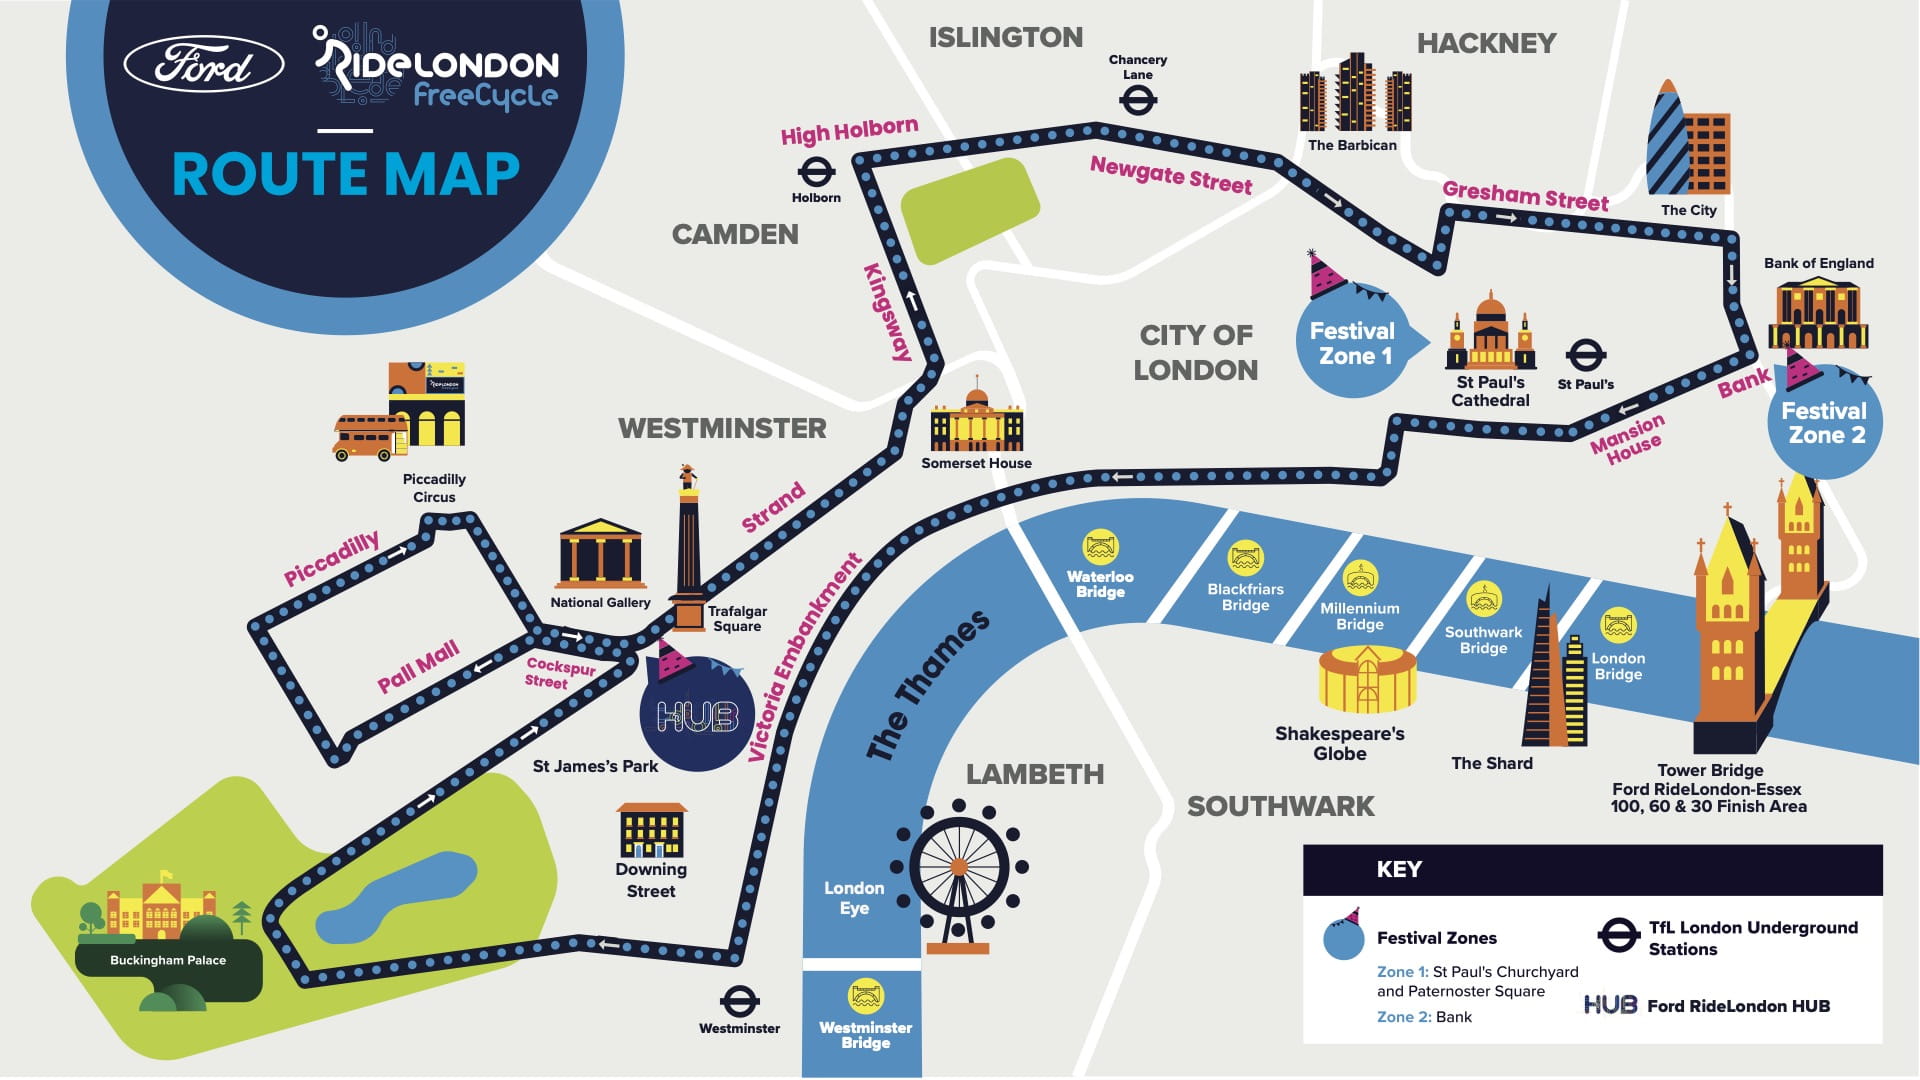 Illustrated map of central London showing the RideLondon FreeCycle route and direction along with major London landmarks, including the River Thames, the four festival zones and several Underground stations. 